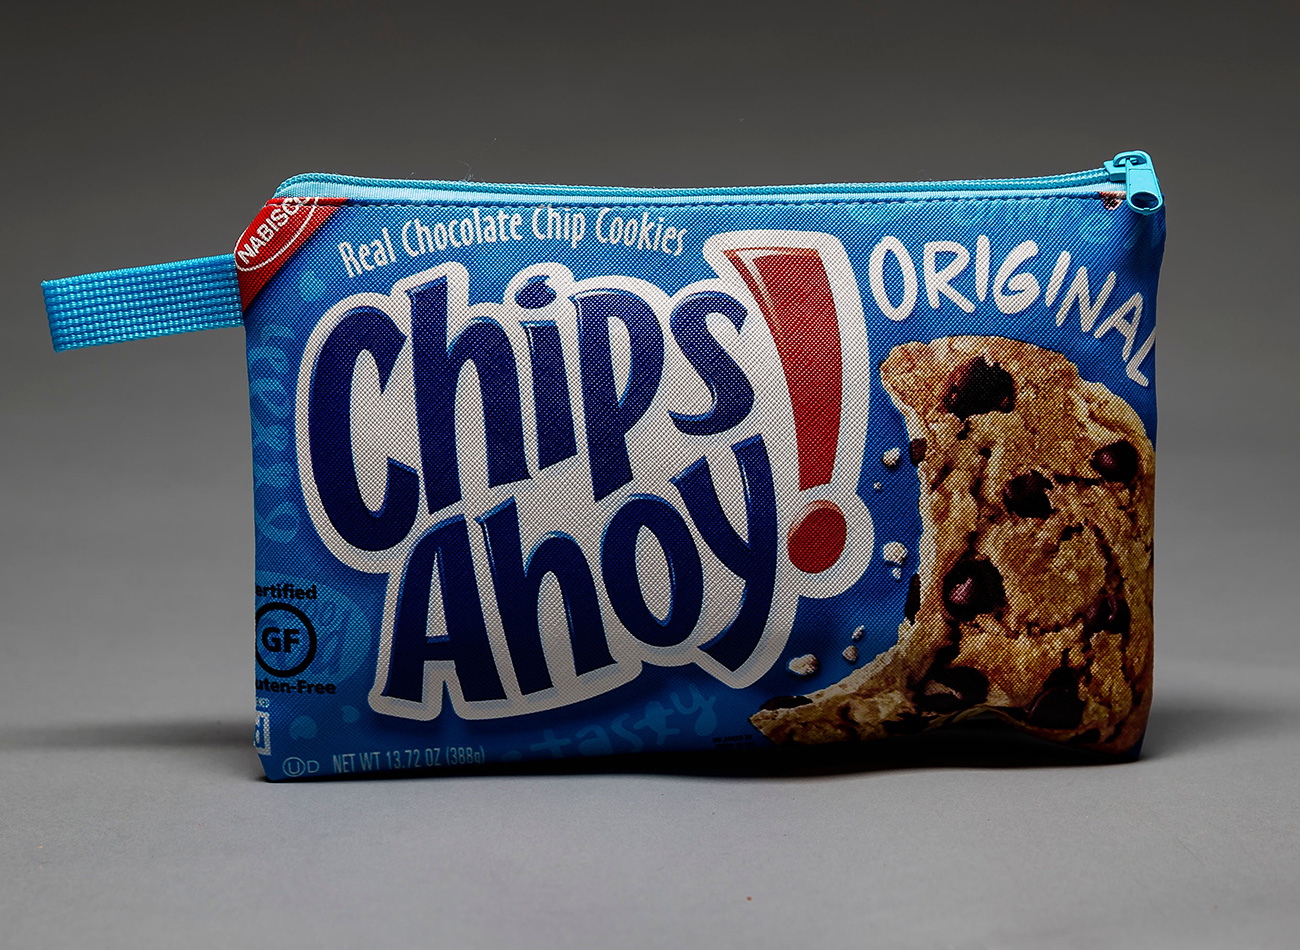 Chips Ahoy Clutch